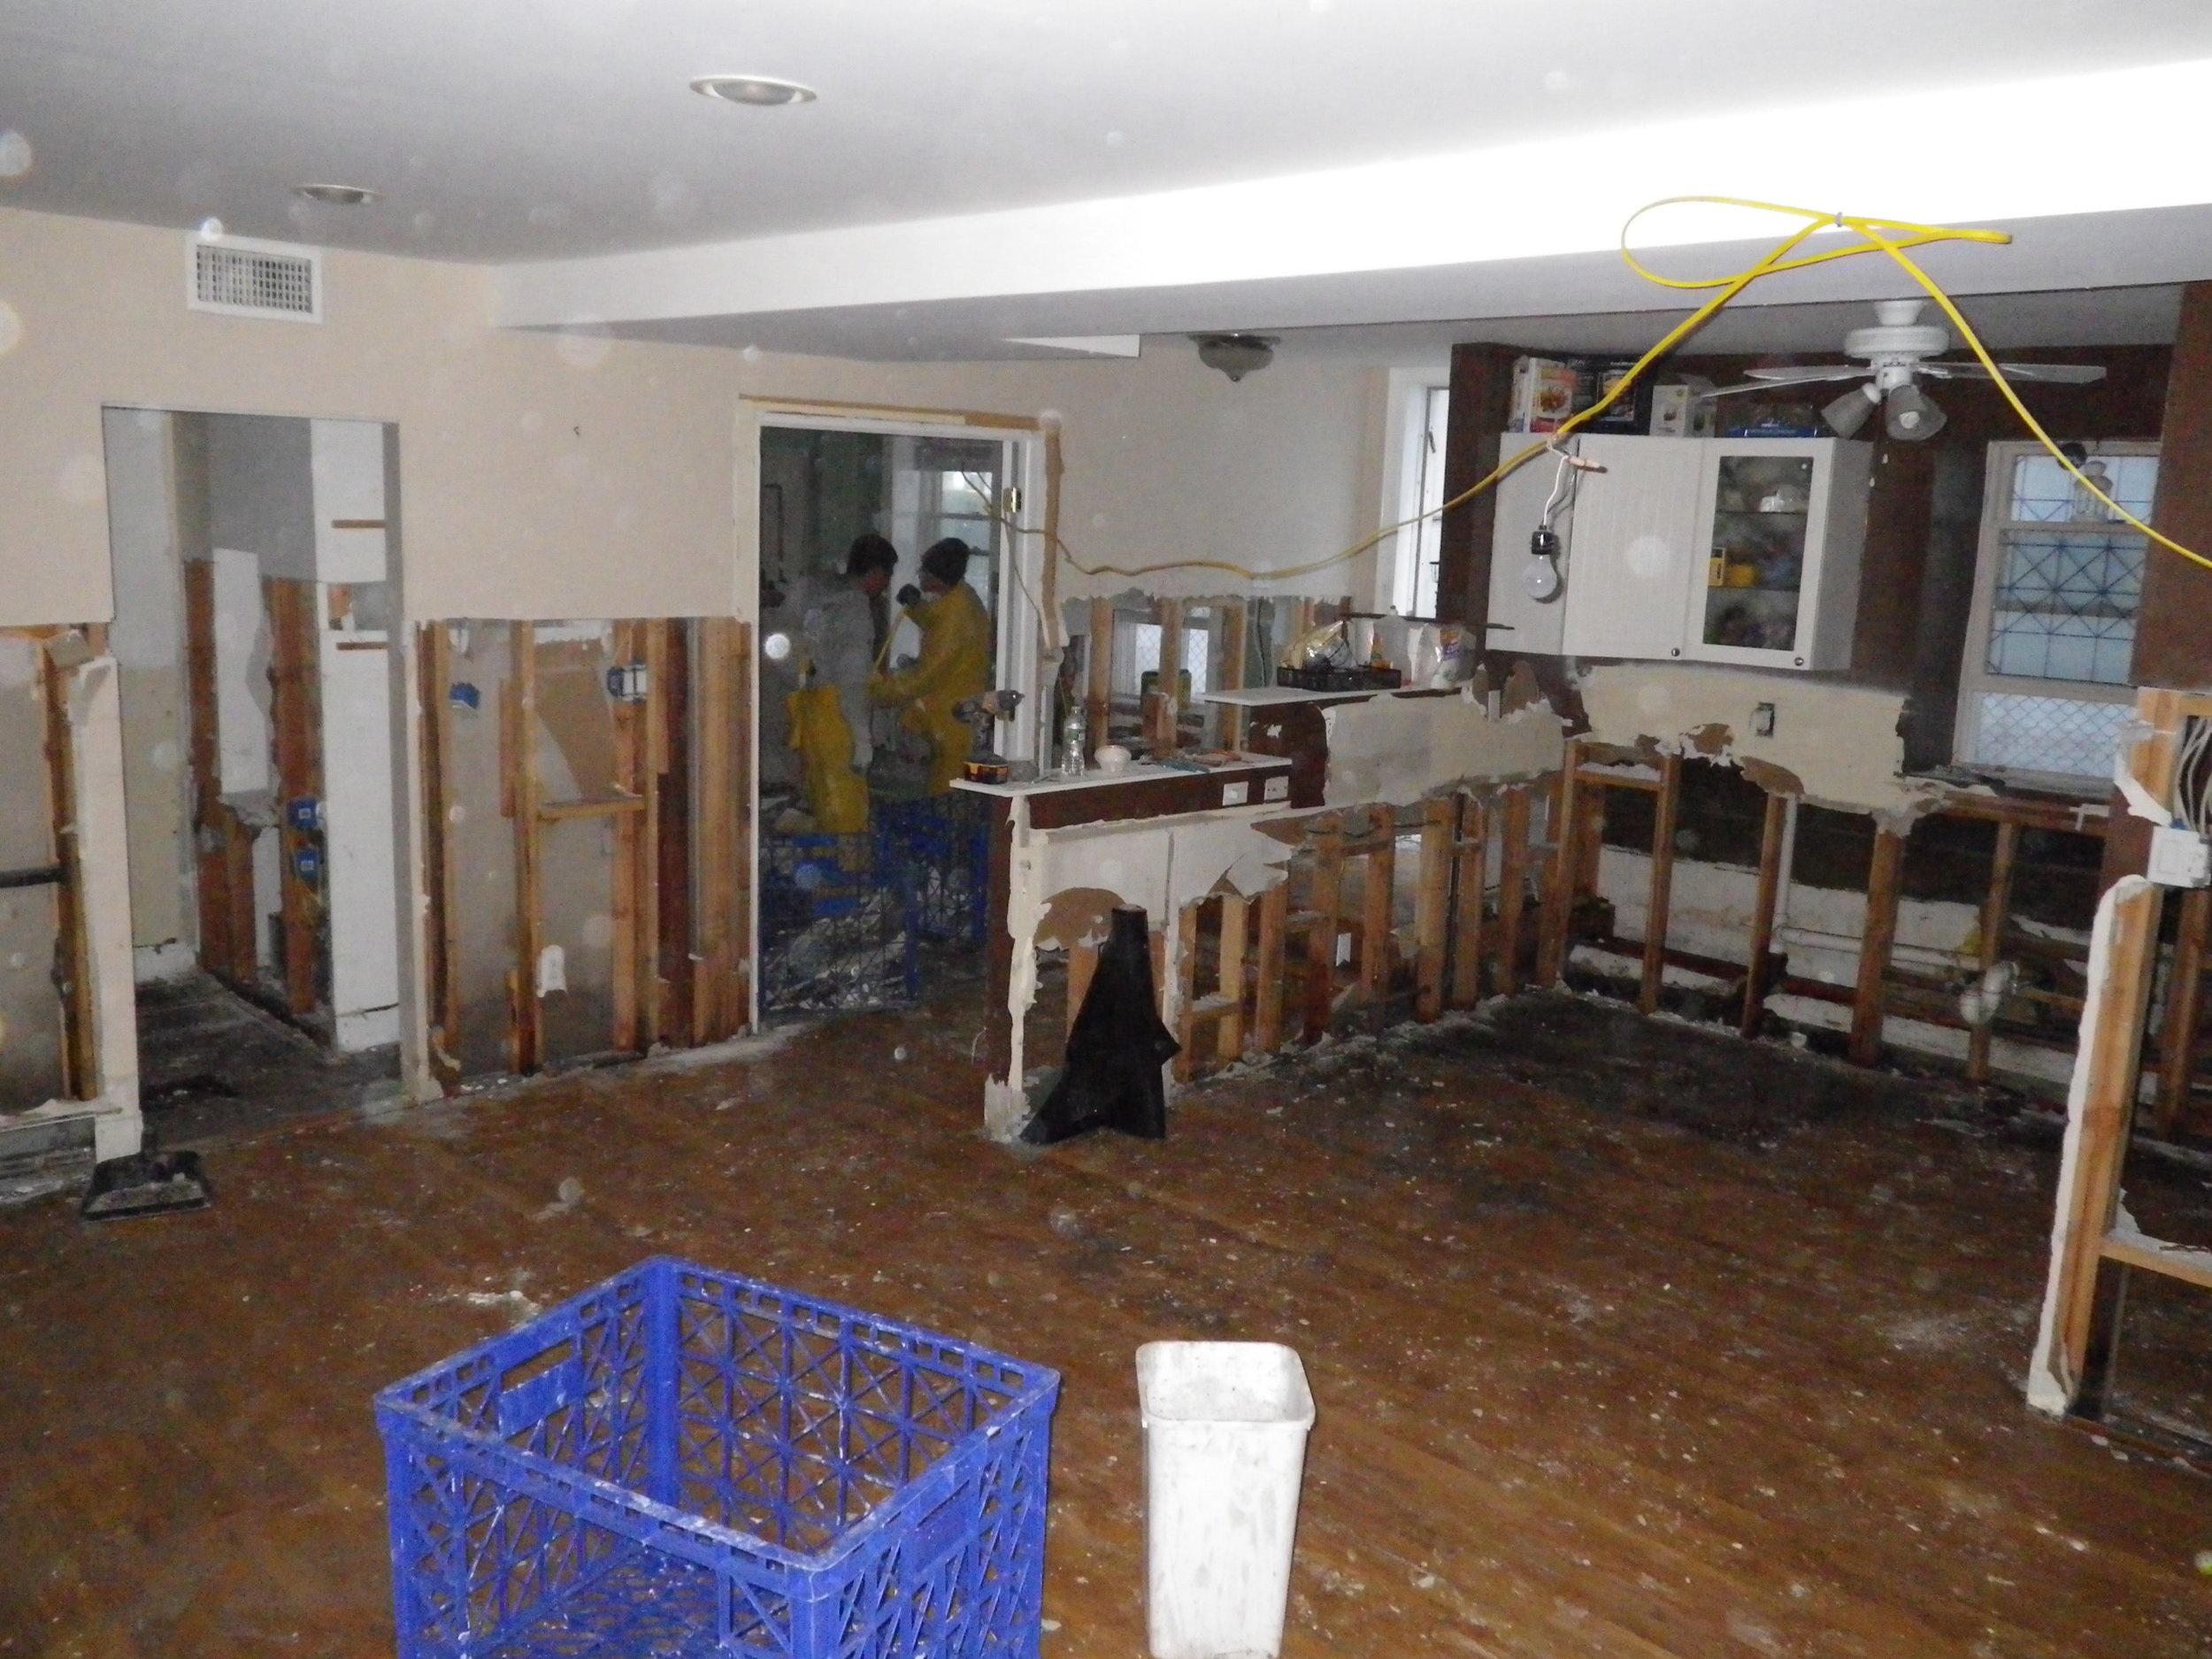 Stephen Serwin's Property - Gutted After Sandy